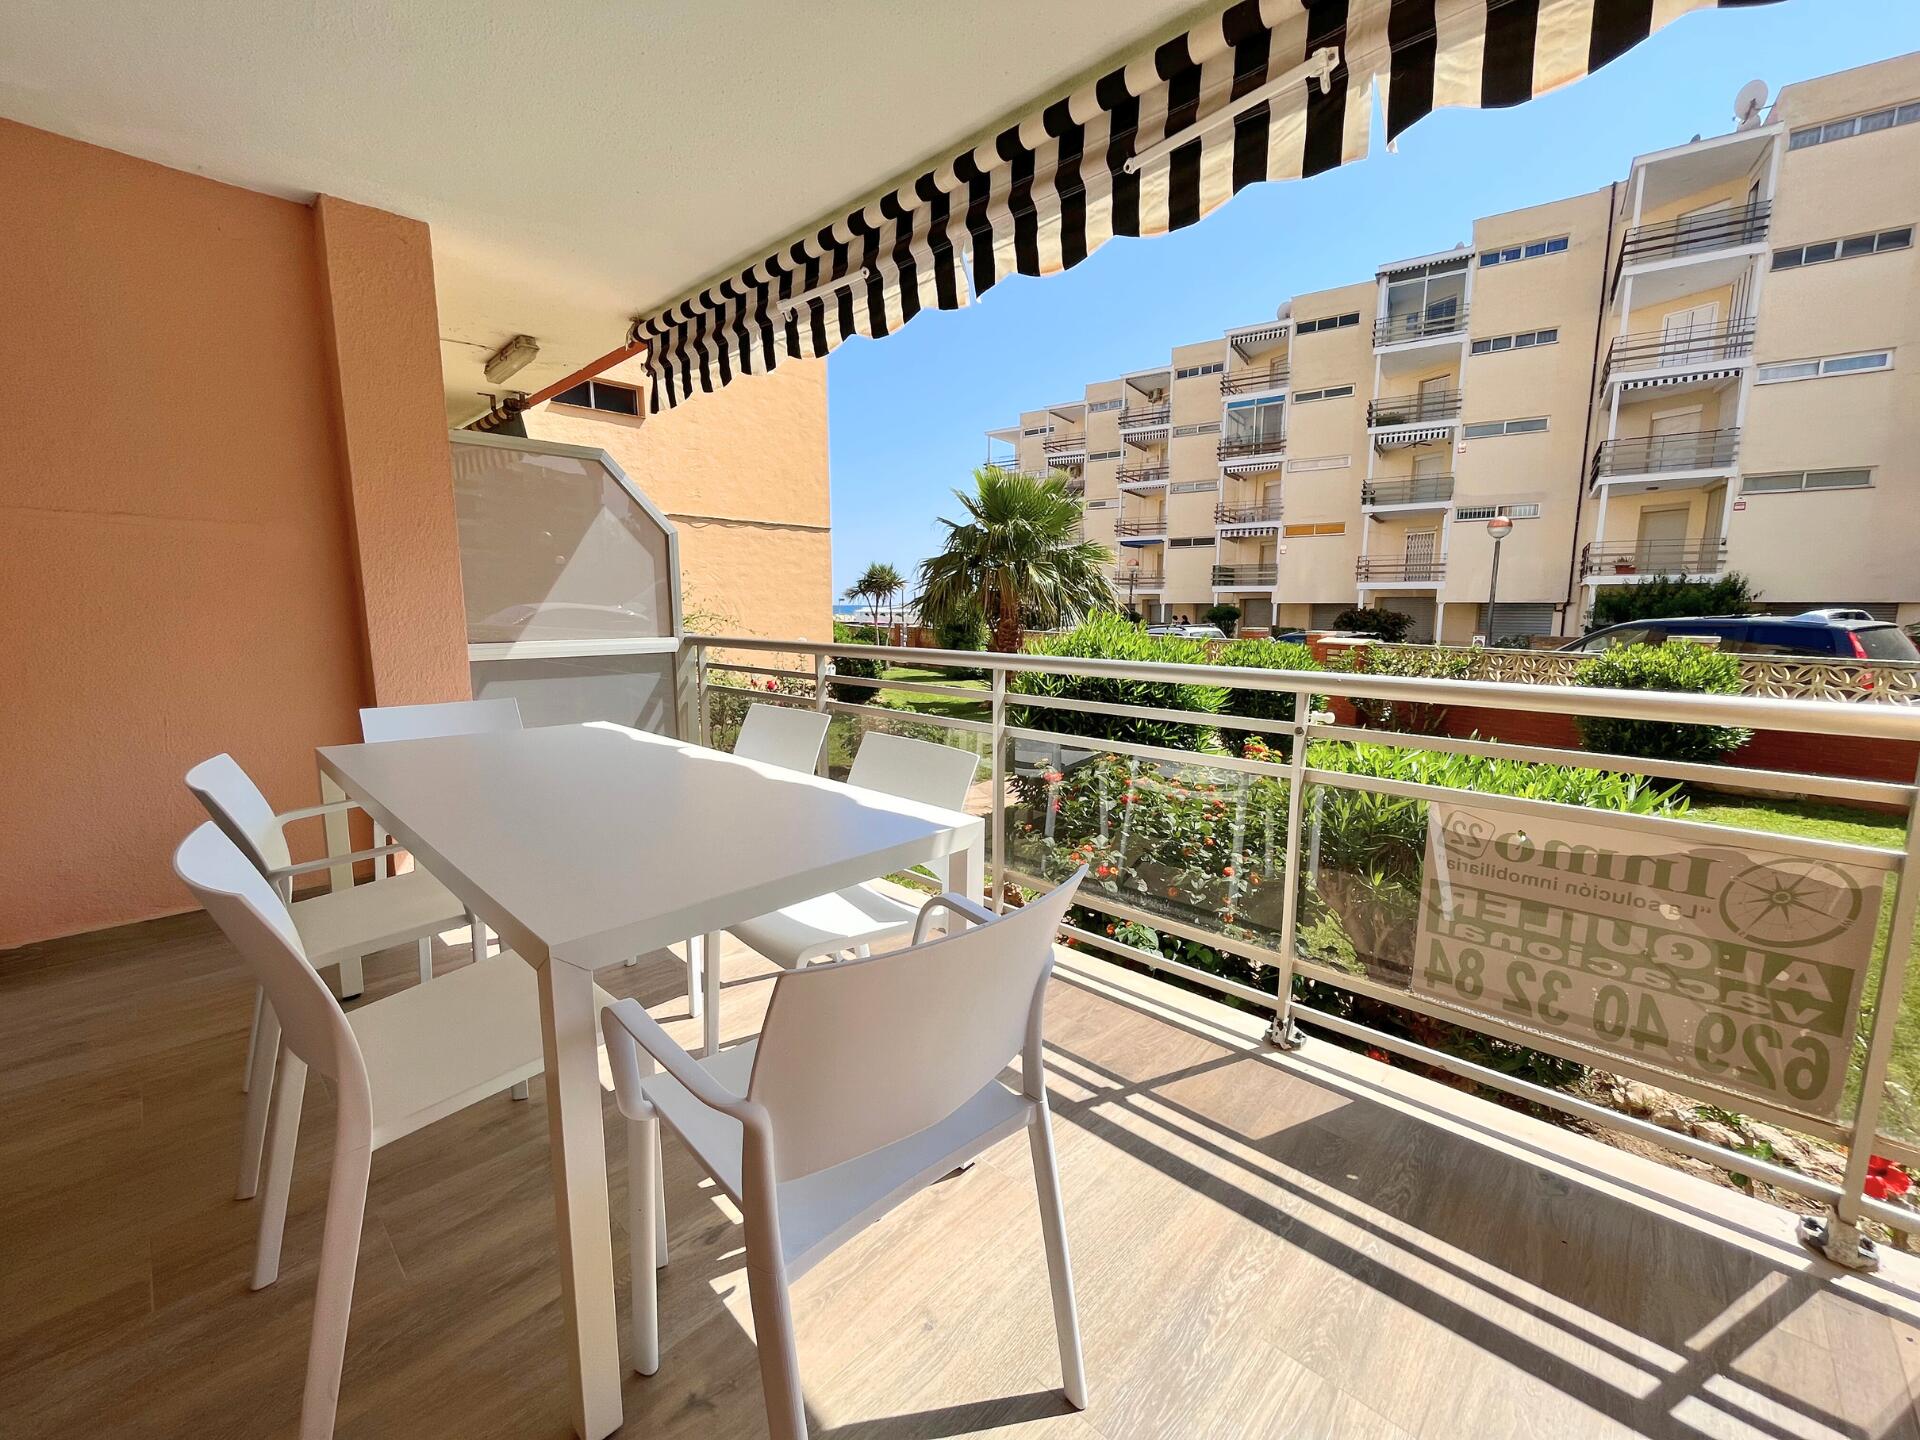 Appartement -
                                            Cambrils -
                                            3 chambres -
                                            8 occupants